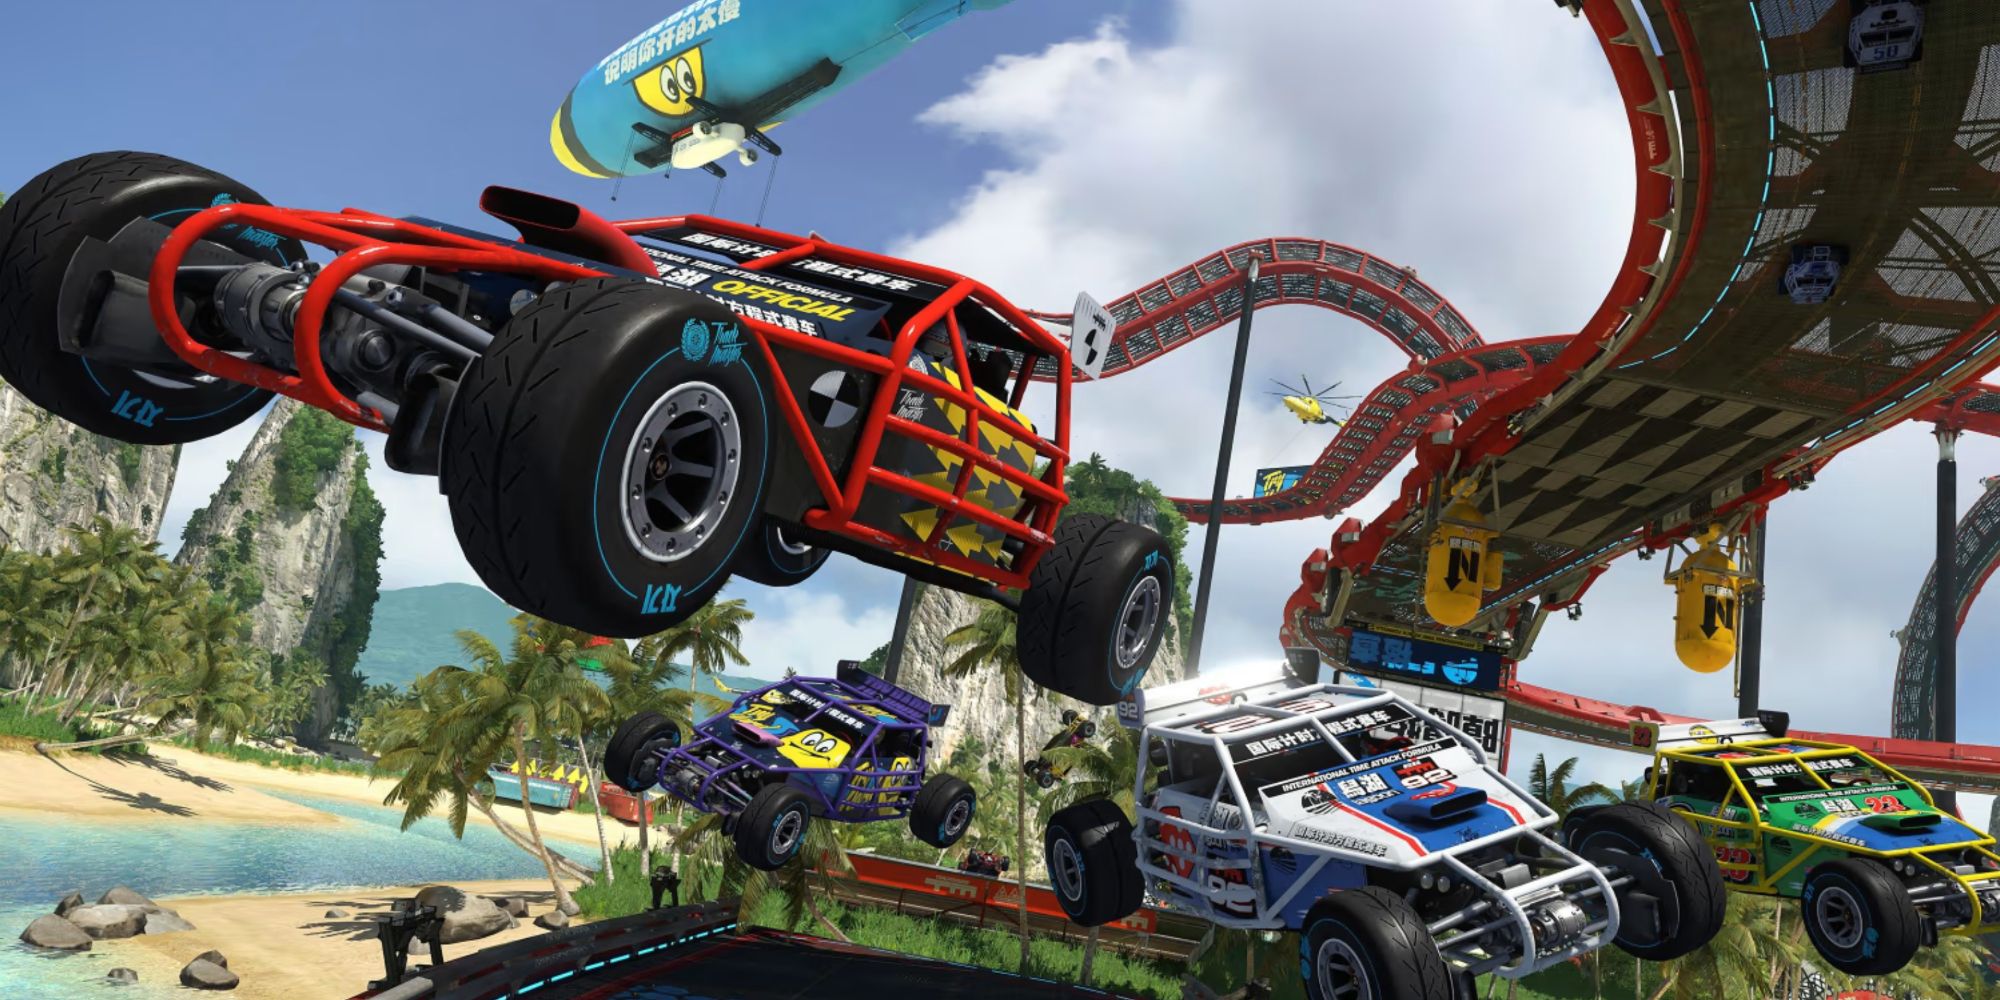 Promotional Art for Trackmania Turbo Featuring Rally-Esque Cars MidFlight